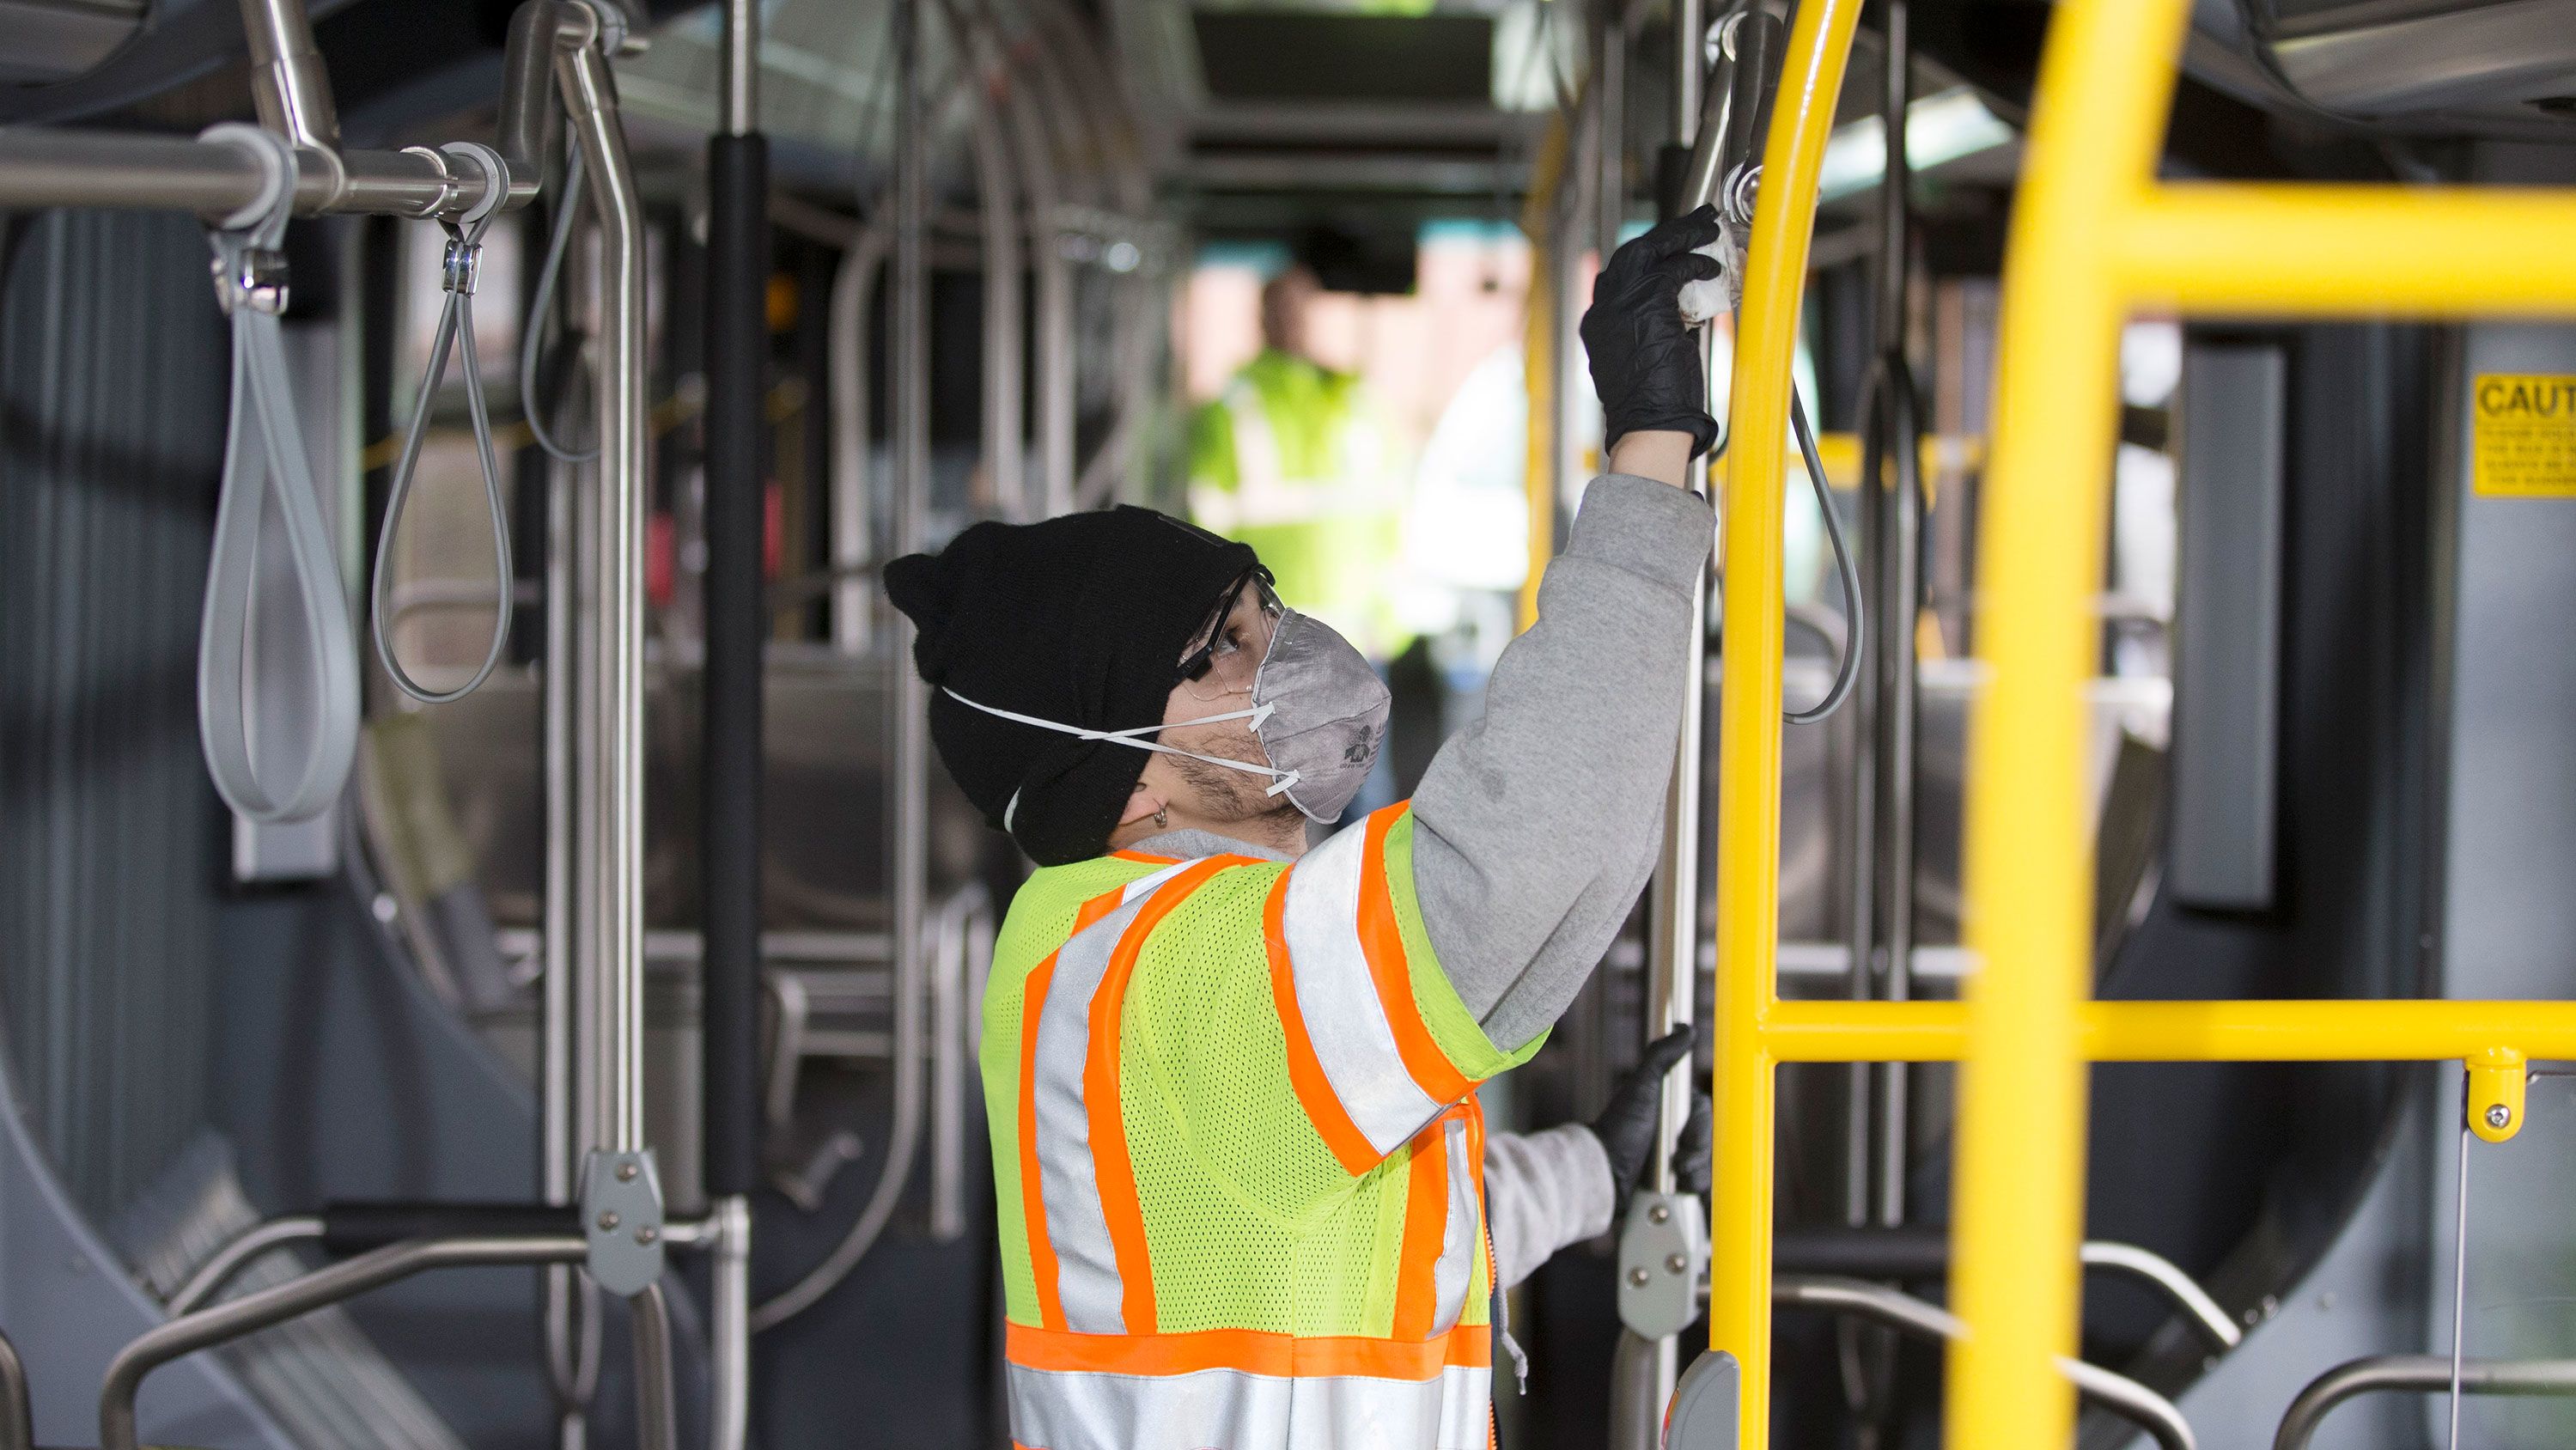 A Seattle transit worker deep cleans a bus.